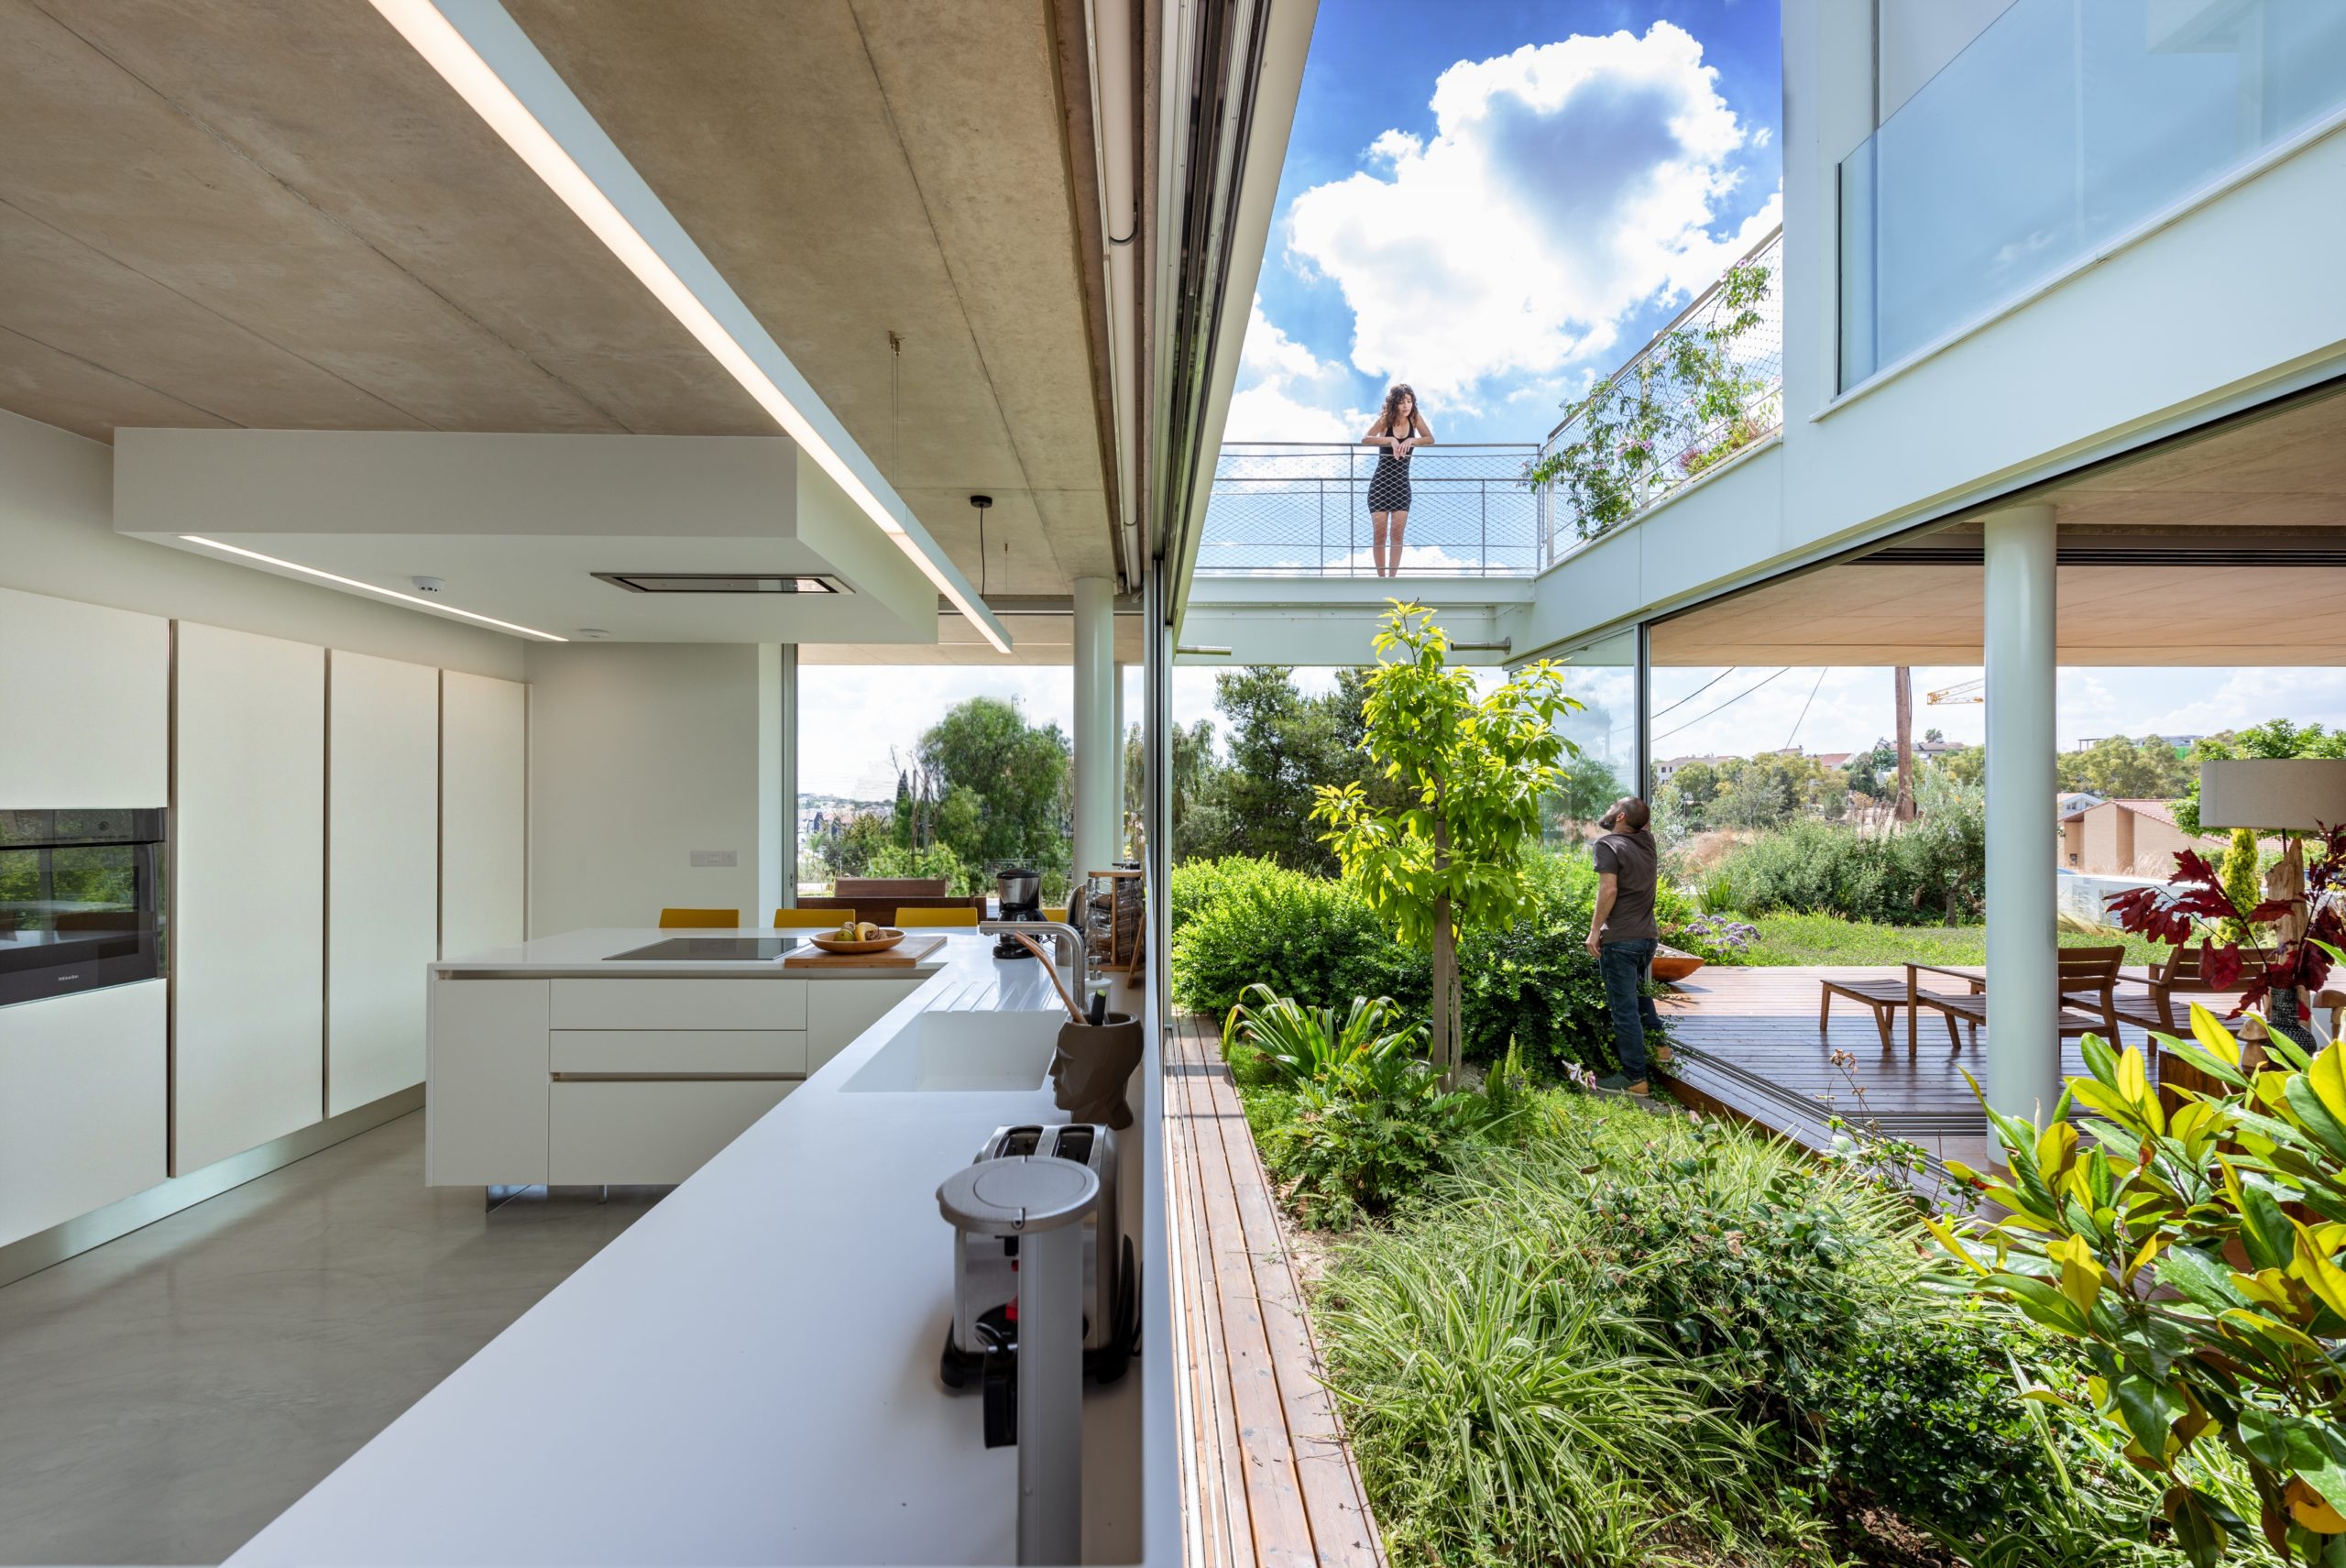 Remarkable Residences Reimagine What Makes a House a Home